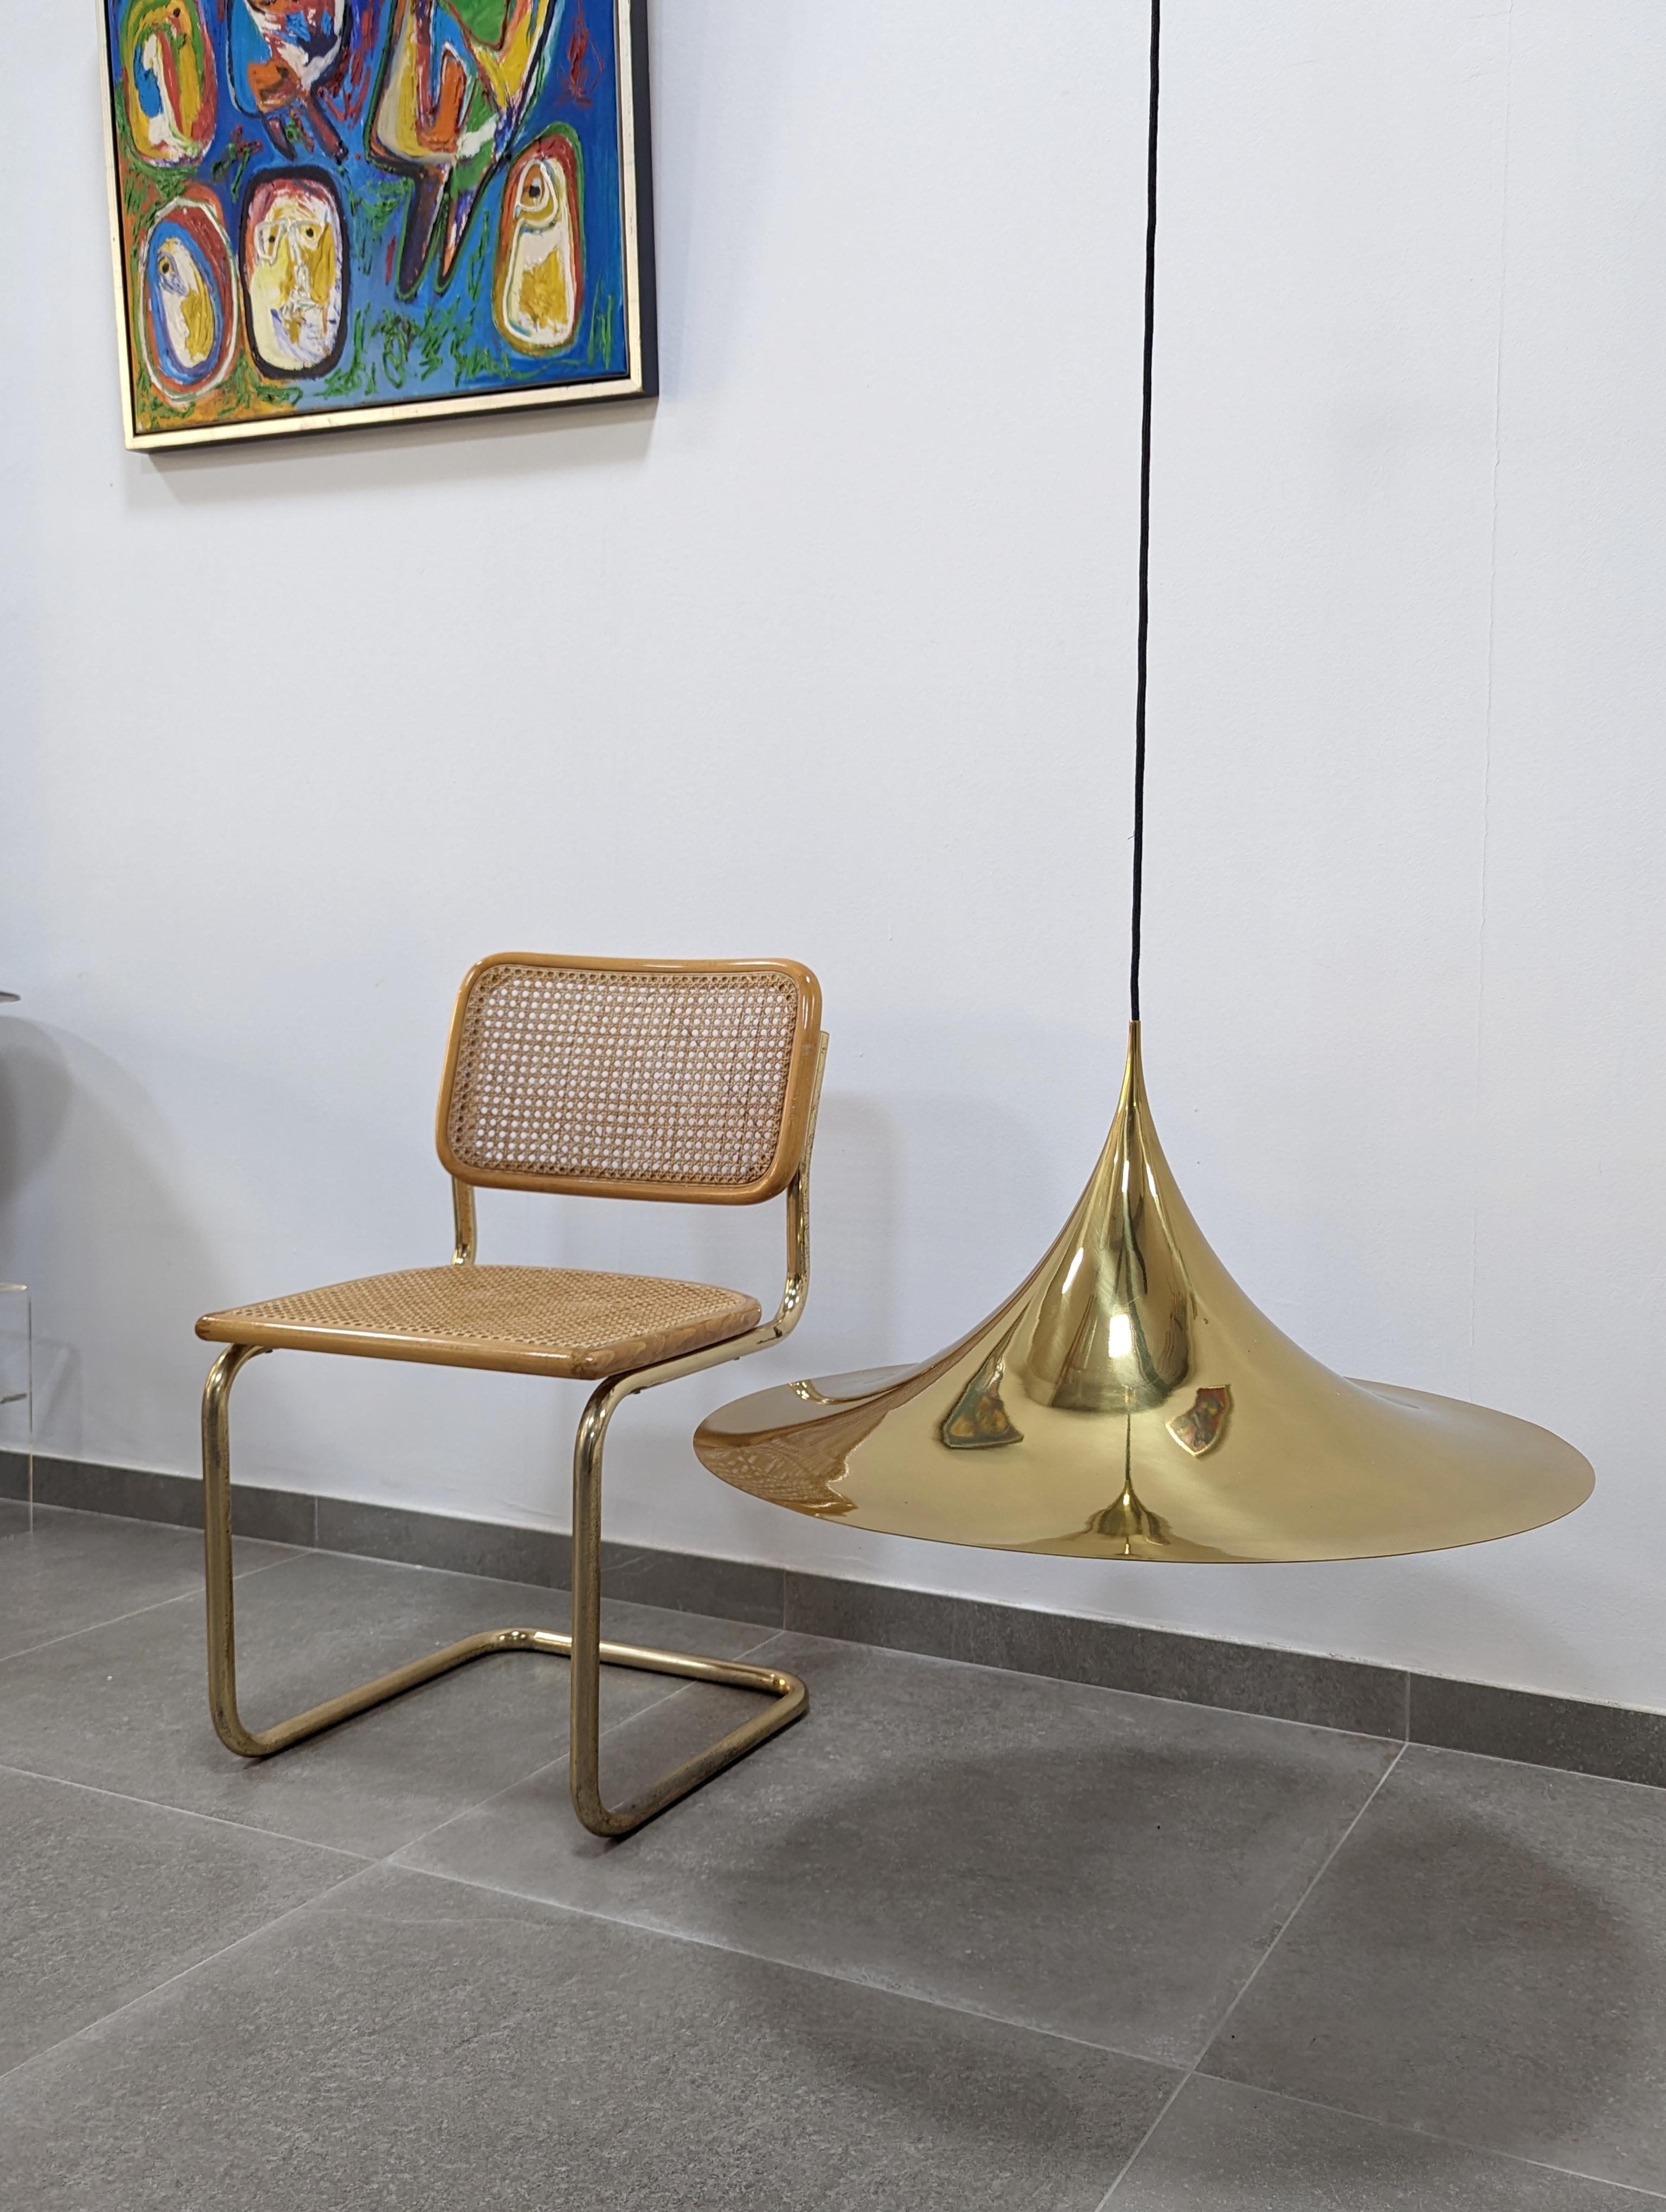 Fabulous Semi lamp designed by Fog & Morup in the 70s in its most exclusive version thanks to its large size of 70 cm in diameter and its shiny brass finish and white interior. A true icon of design.

Total length 150cm.